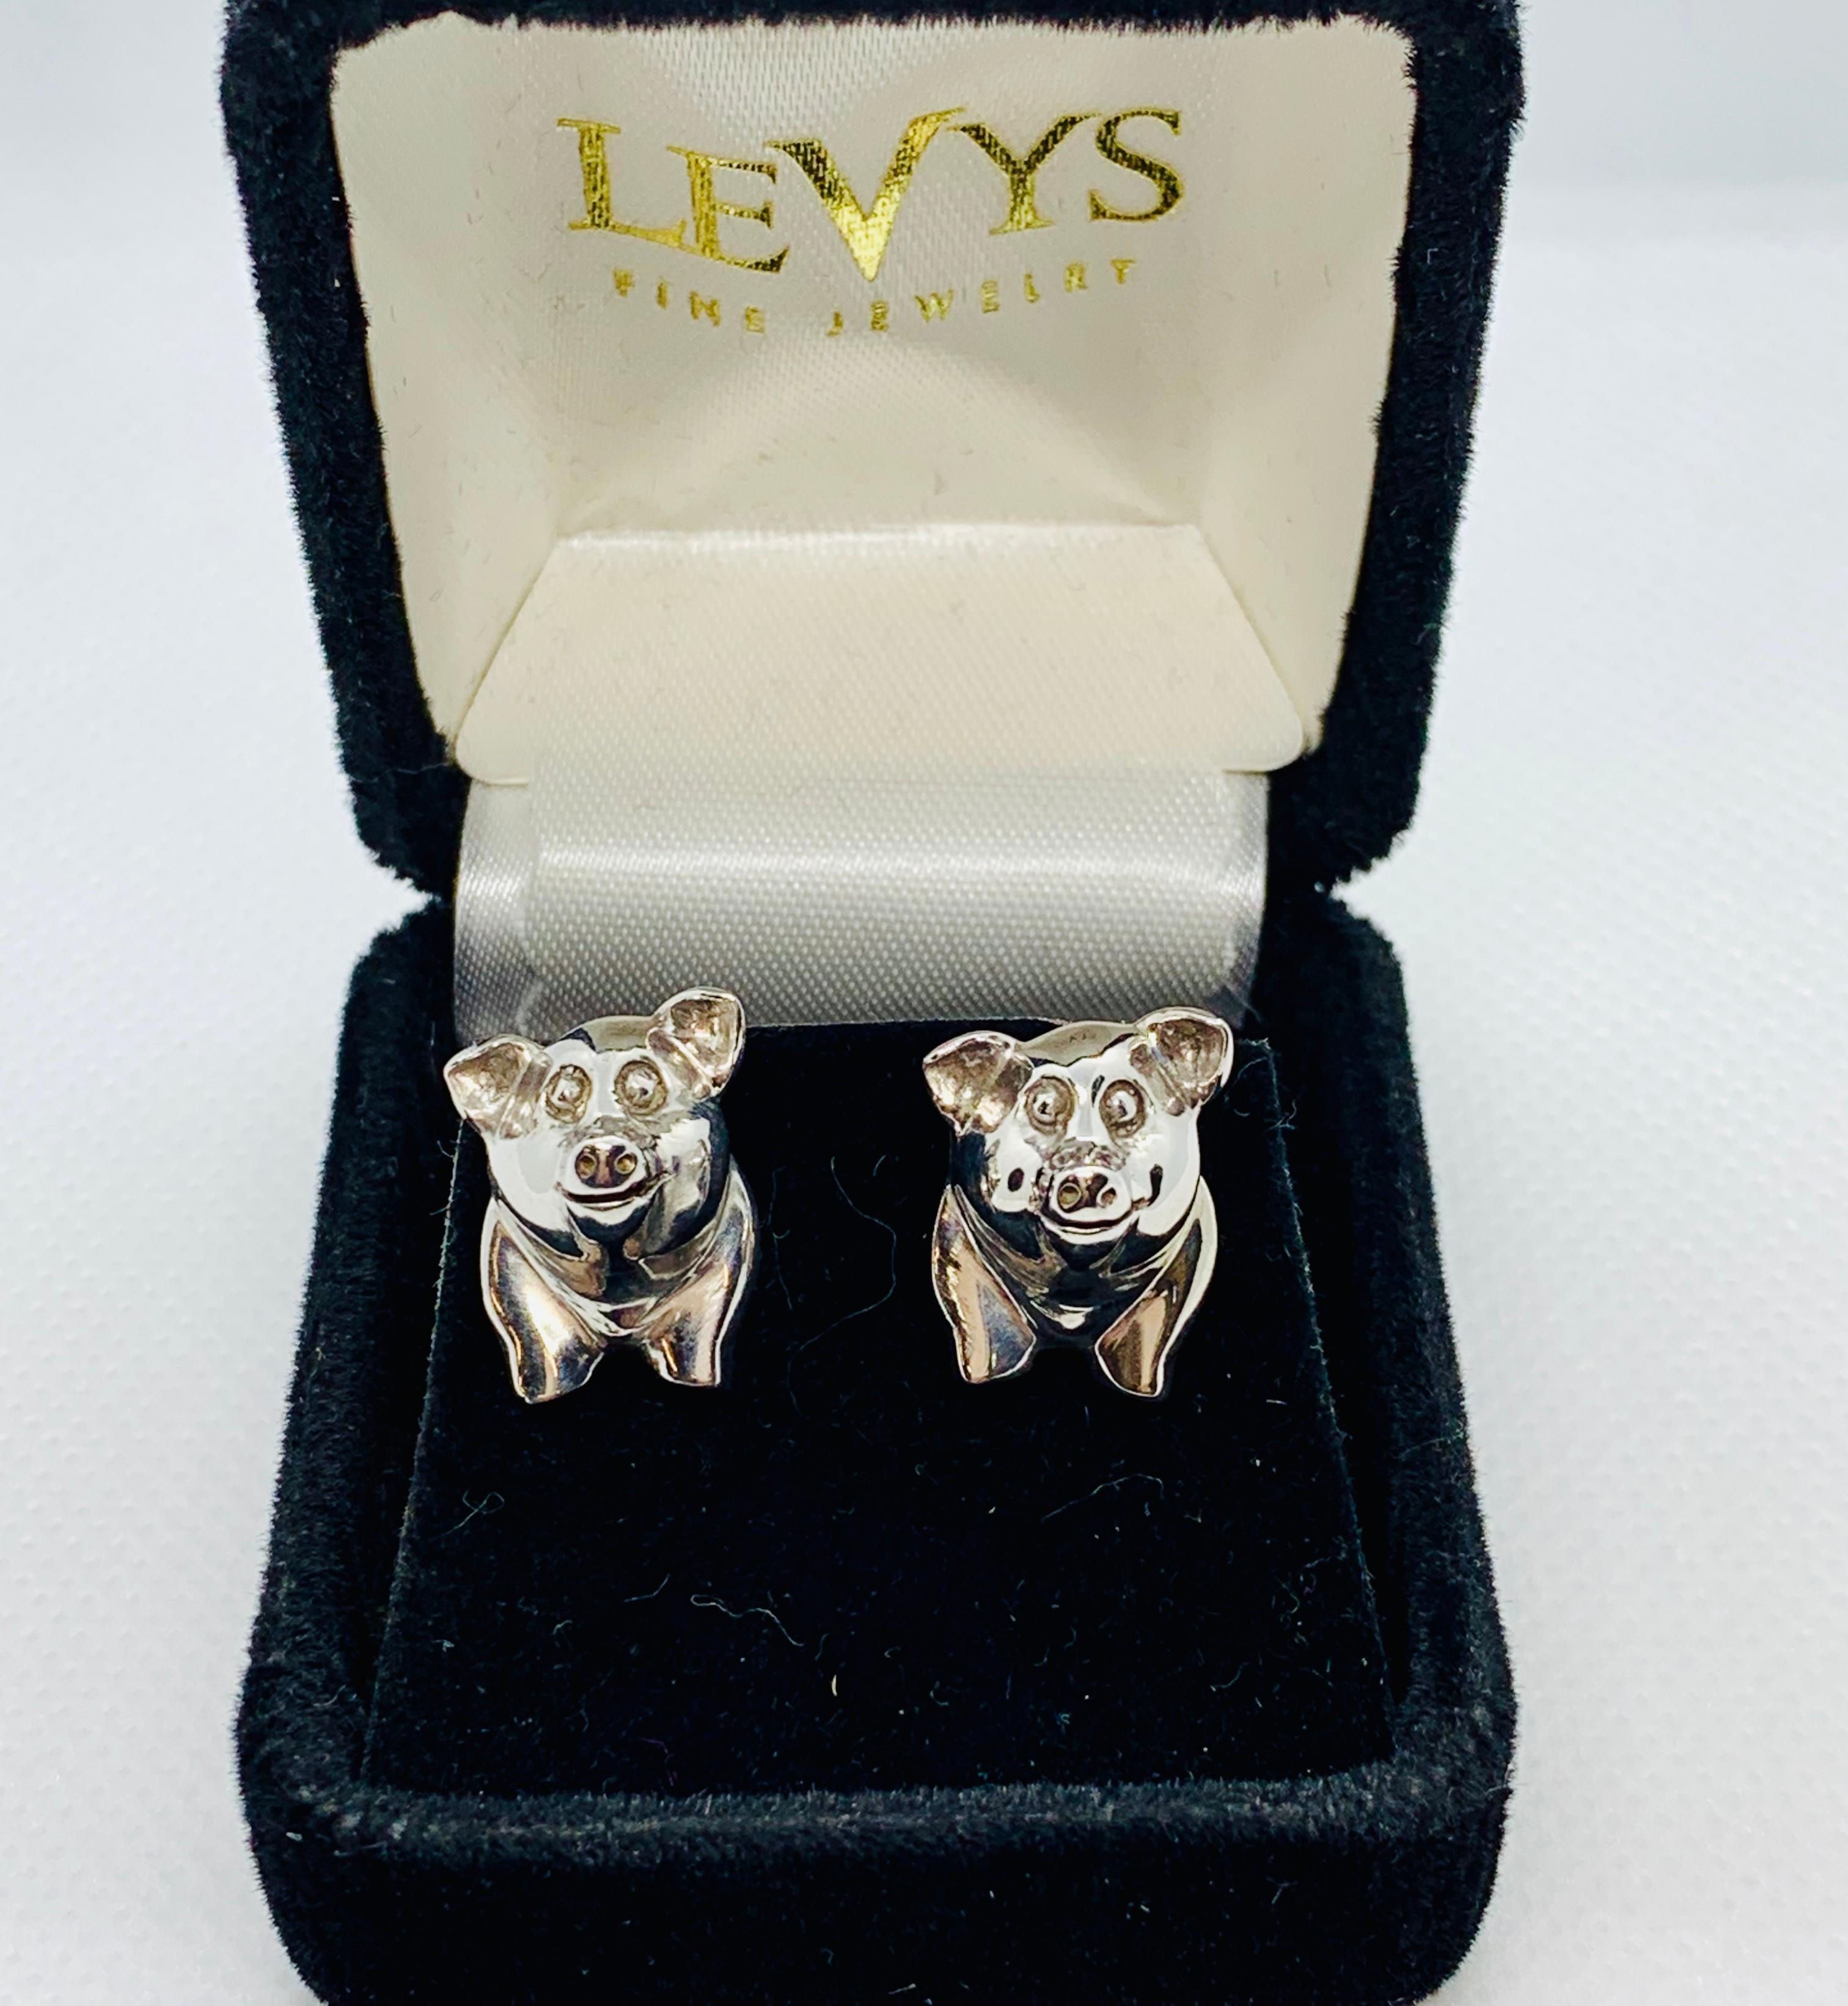 So festive and whimsical set of cufflinks! Made in sterling silver these cufflinks have the pig's smiling head as the front link and the chubby rear with curly tail as the rear link. Set weighs 18.8 grams. The front link / front of the pig measures